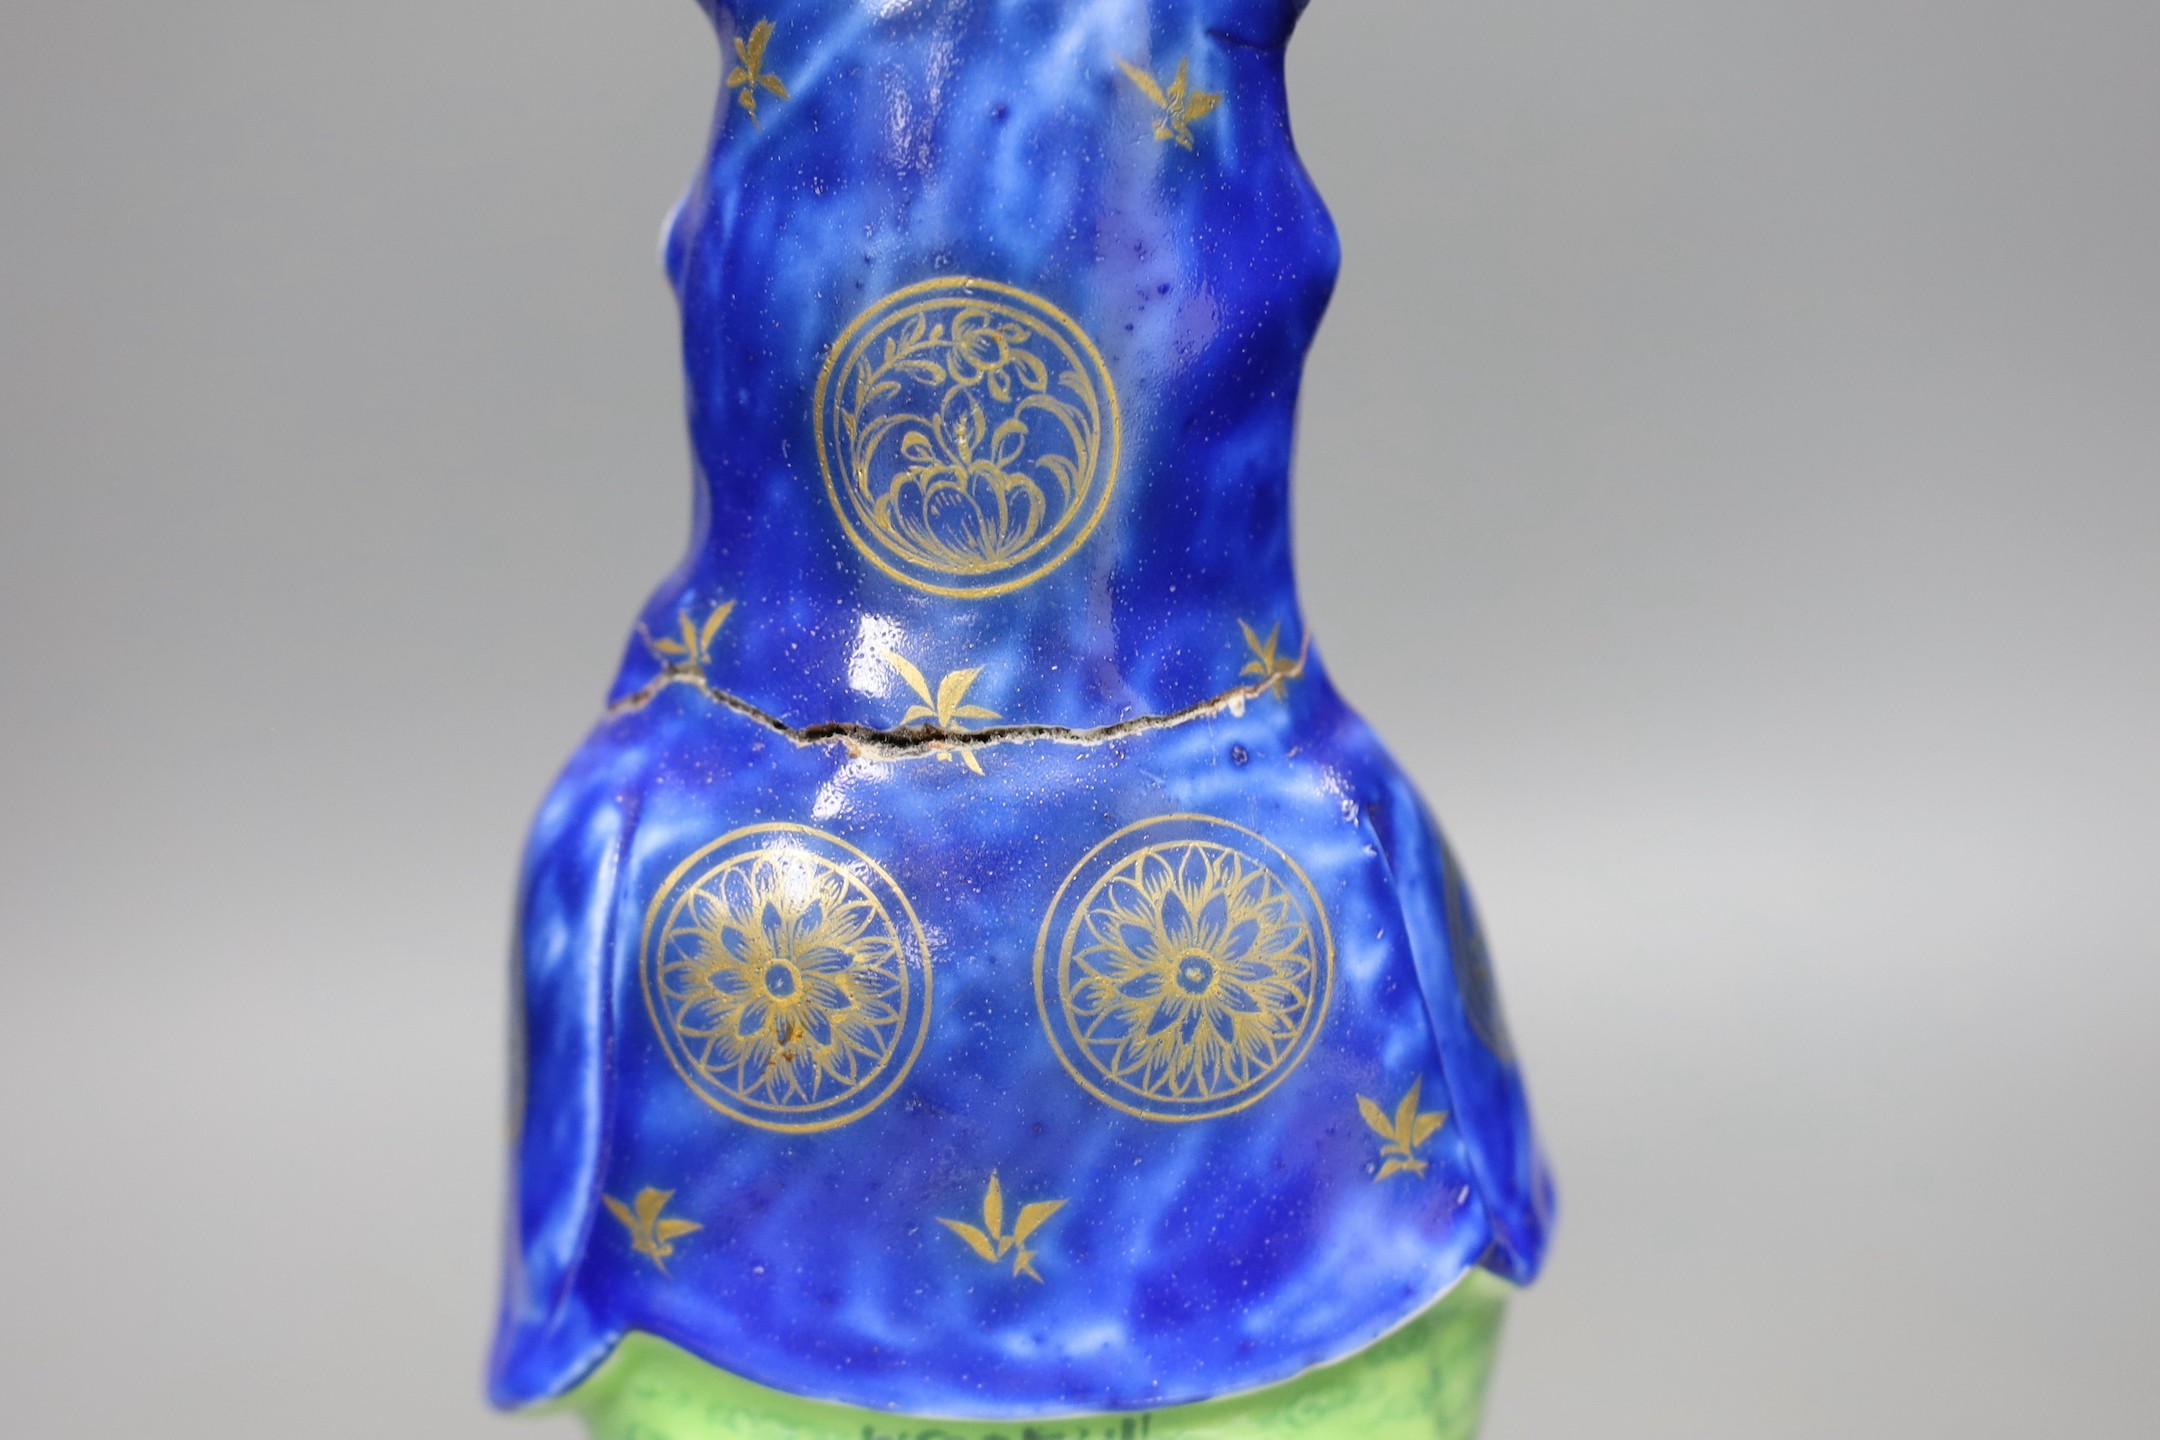 A Chinese enamelled porcelain figure of Guanyin, Jiaqing - Daoguang period, damage, 34cms high